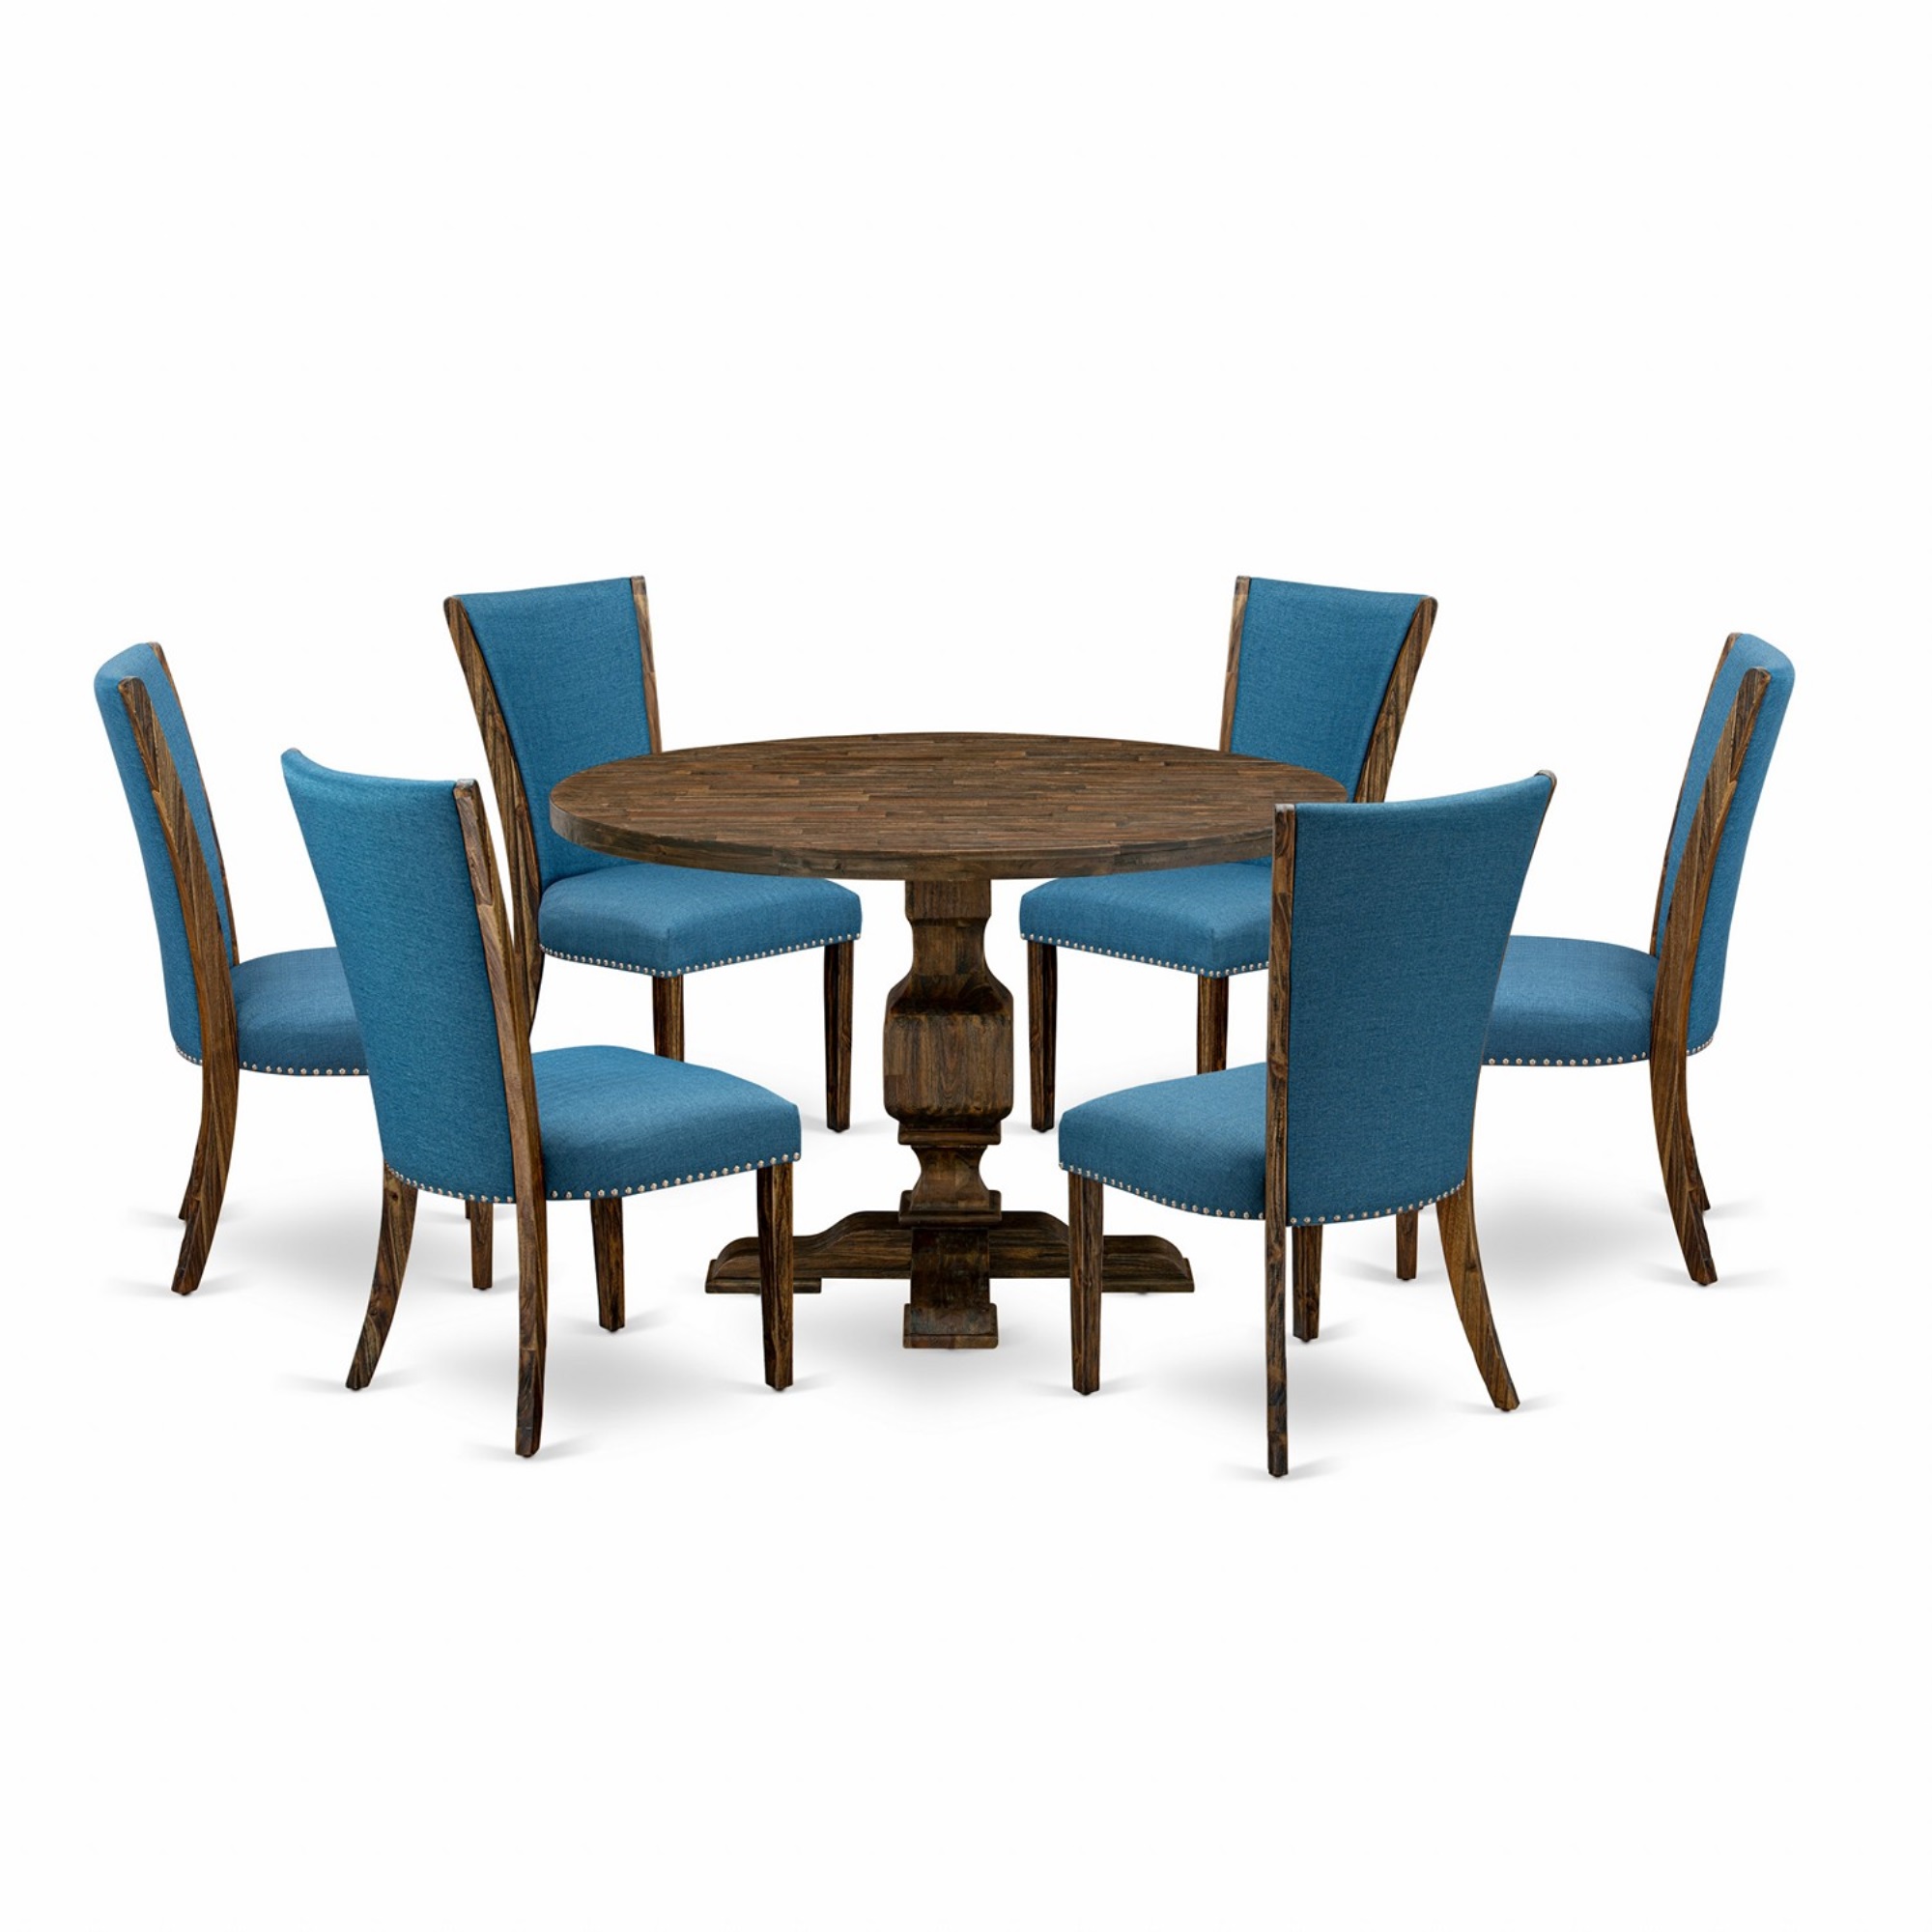 East West Furniture I3VE7-721 7Pc Dining Set - Round Table and 6 Parson Chairs - Distressed Jacobean Color